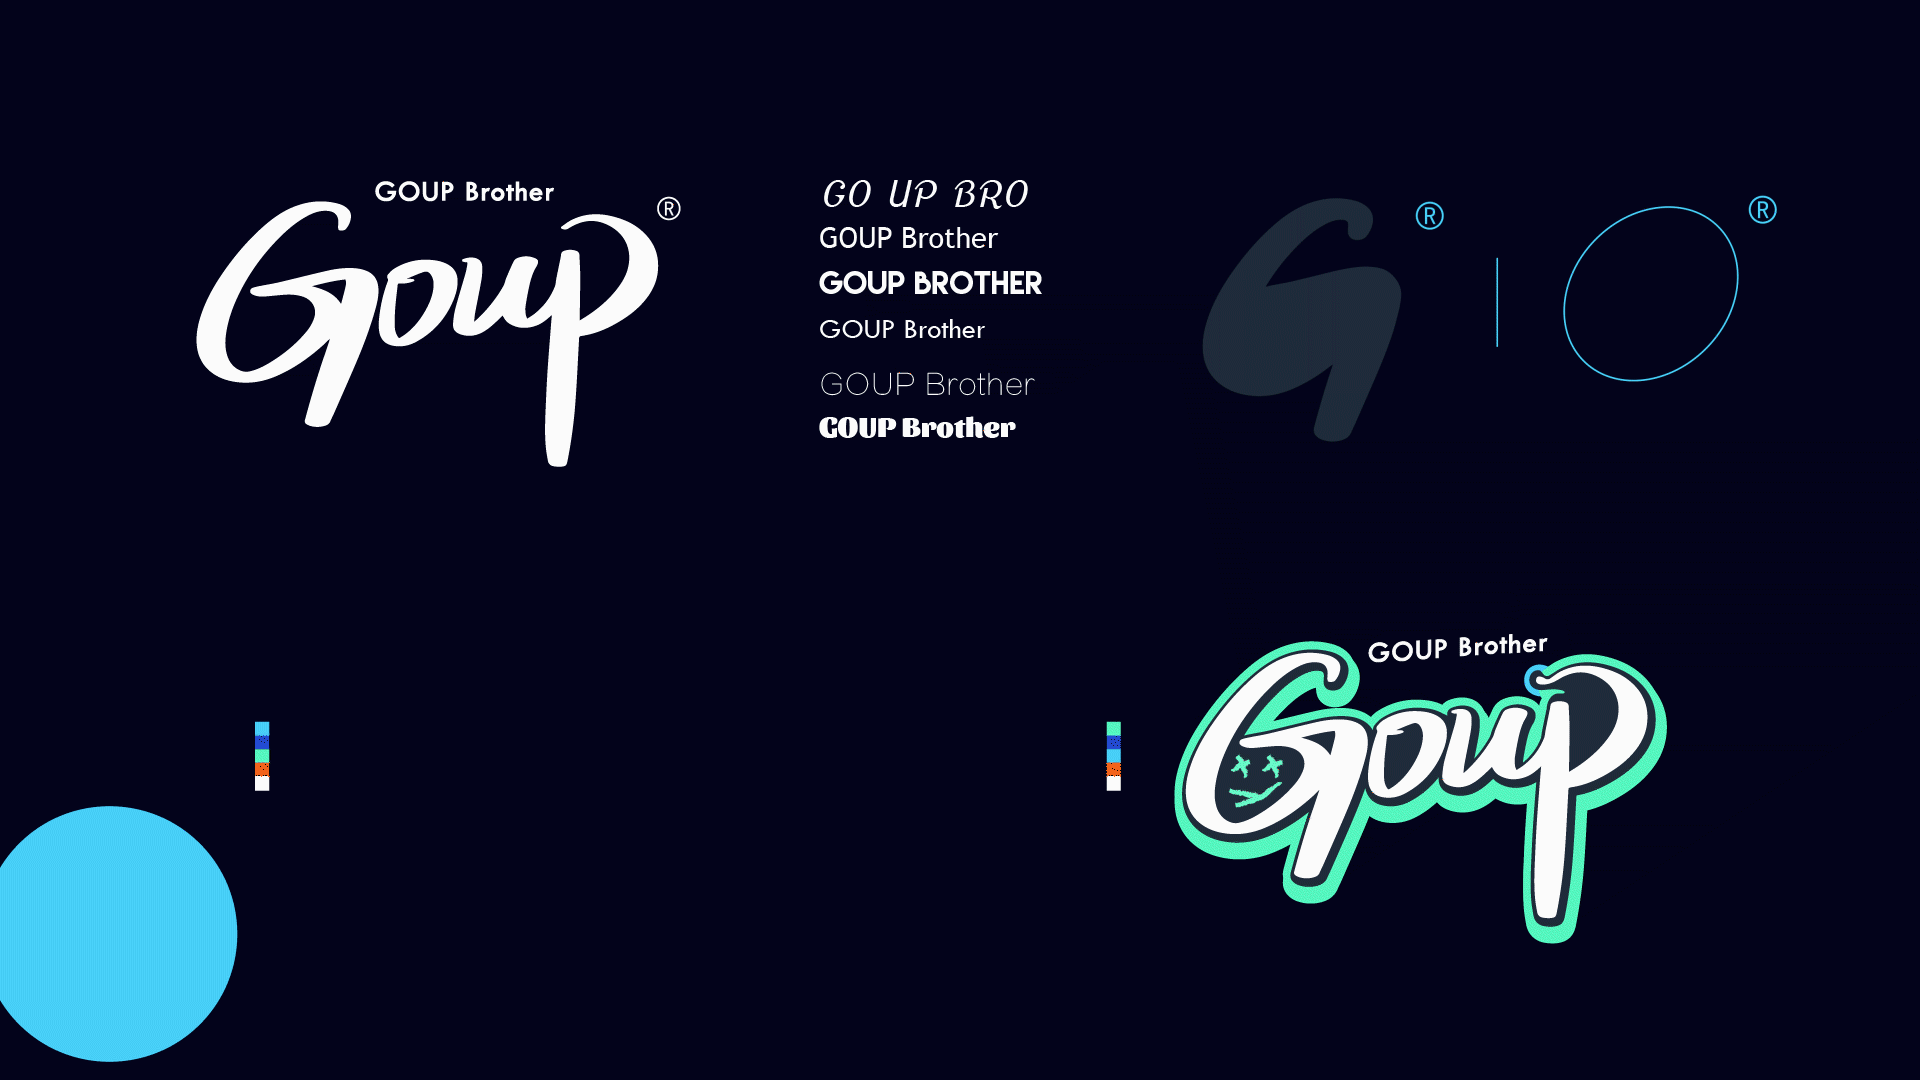 GOUP Brother logo motion graphics